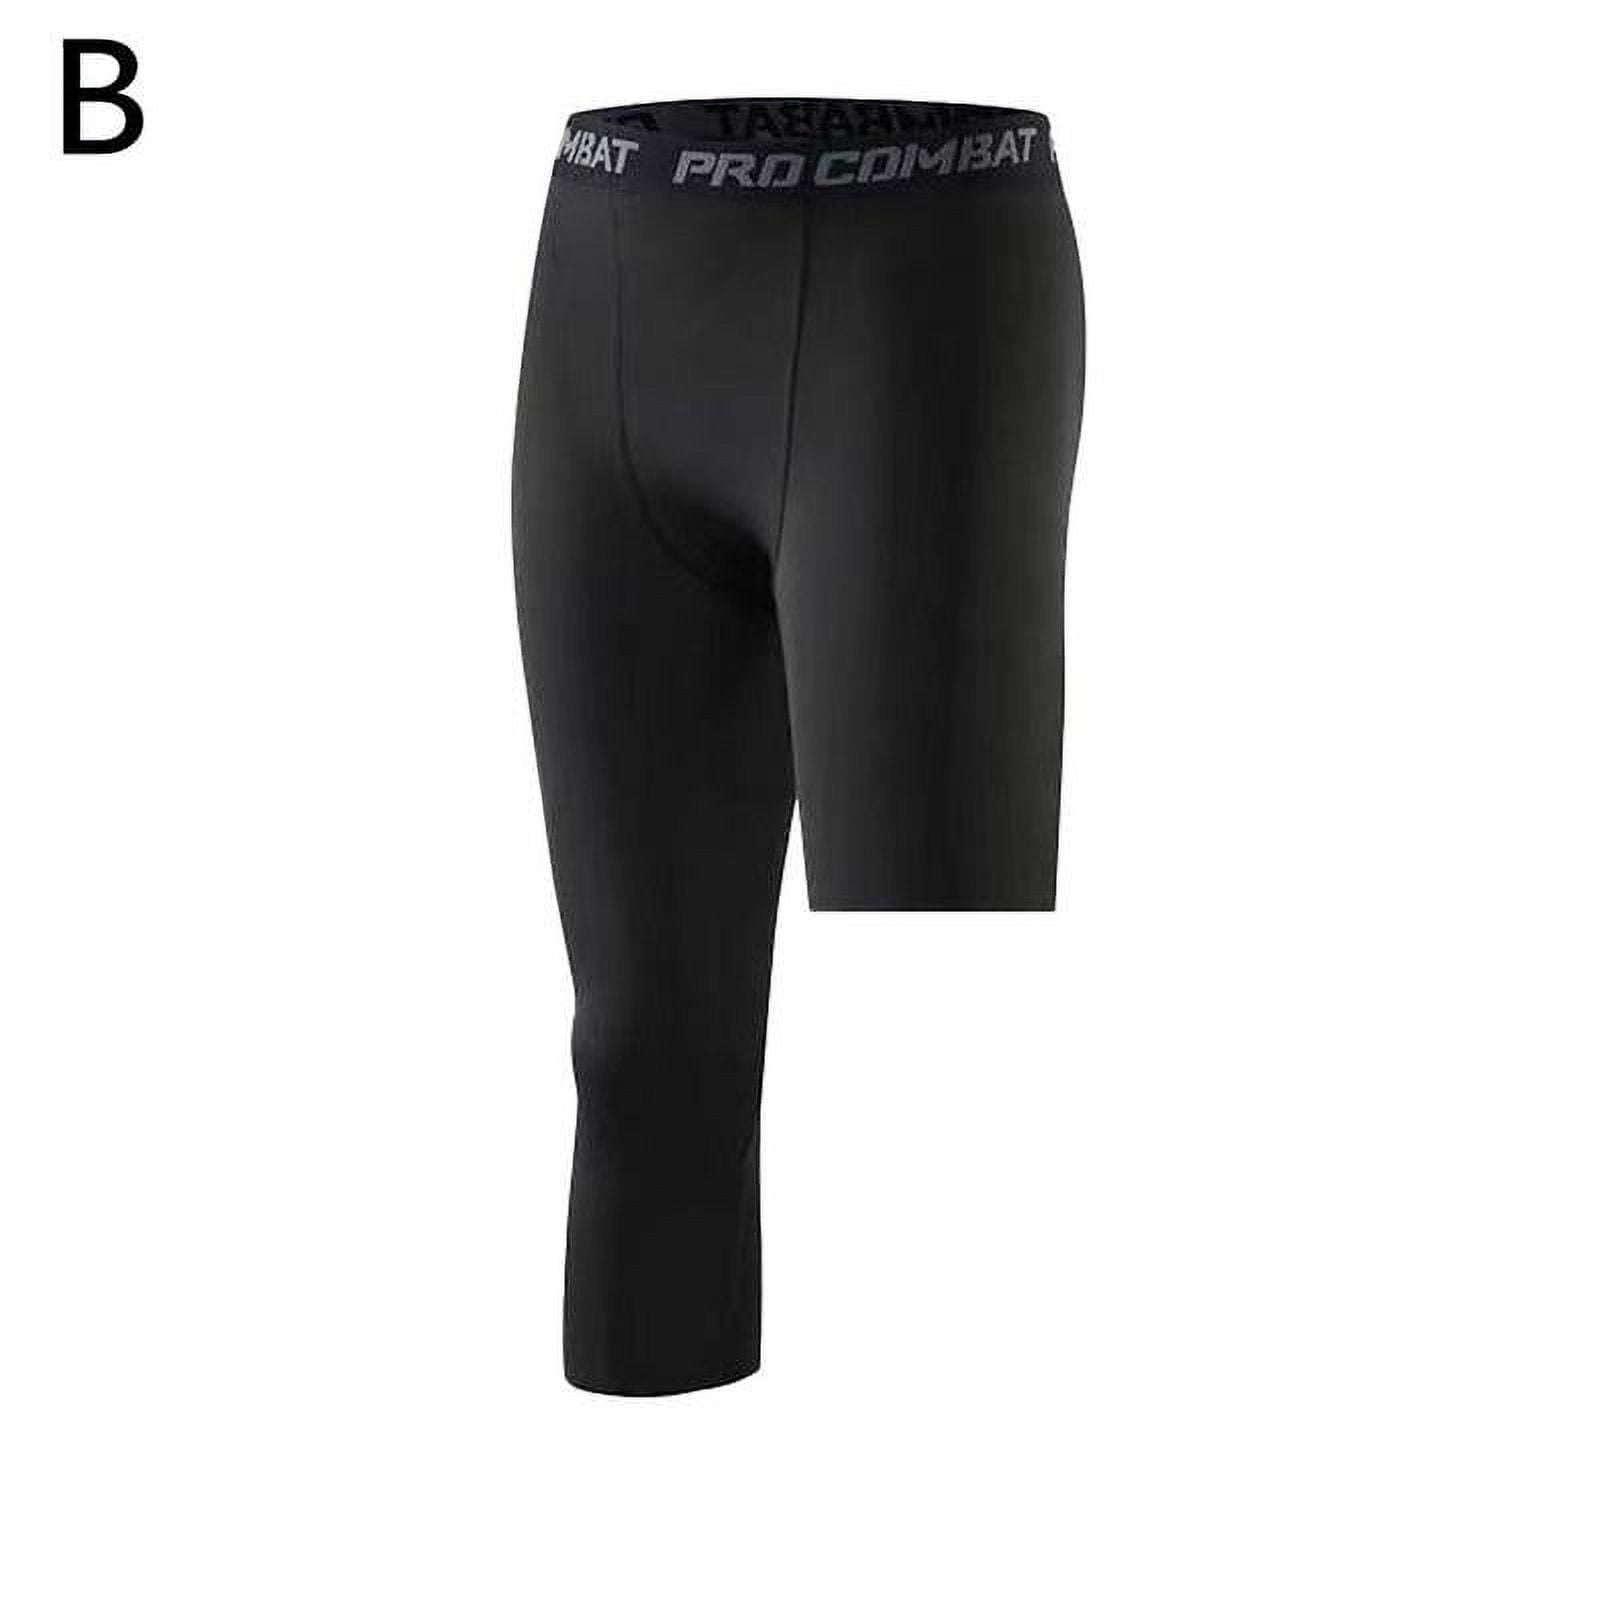 New Men Basketball Tights Pants Compression Cropped One Leg Leggings Sport  Running Trousers Bottom Fitness Training Jogging Gym D5F2